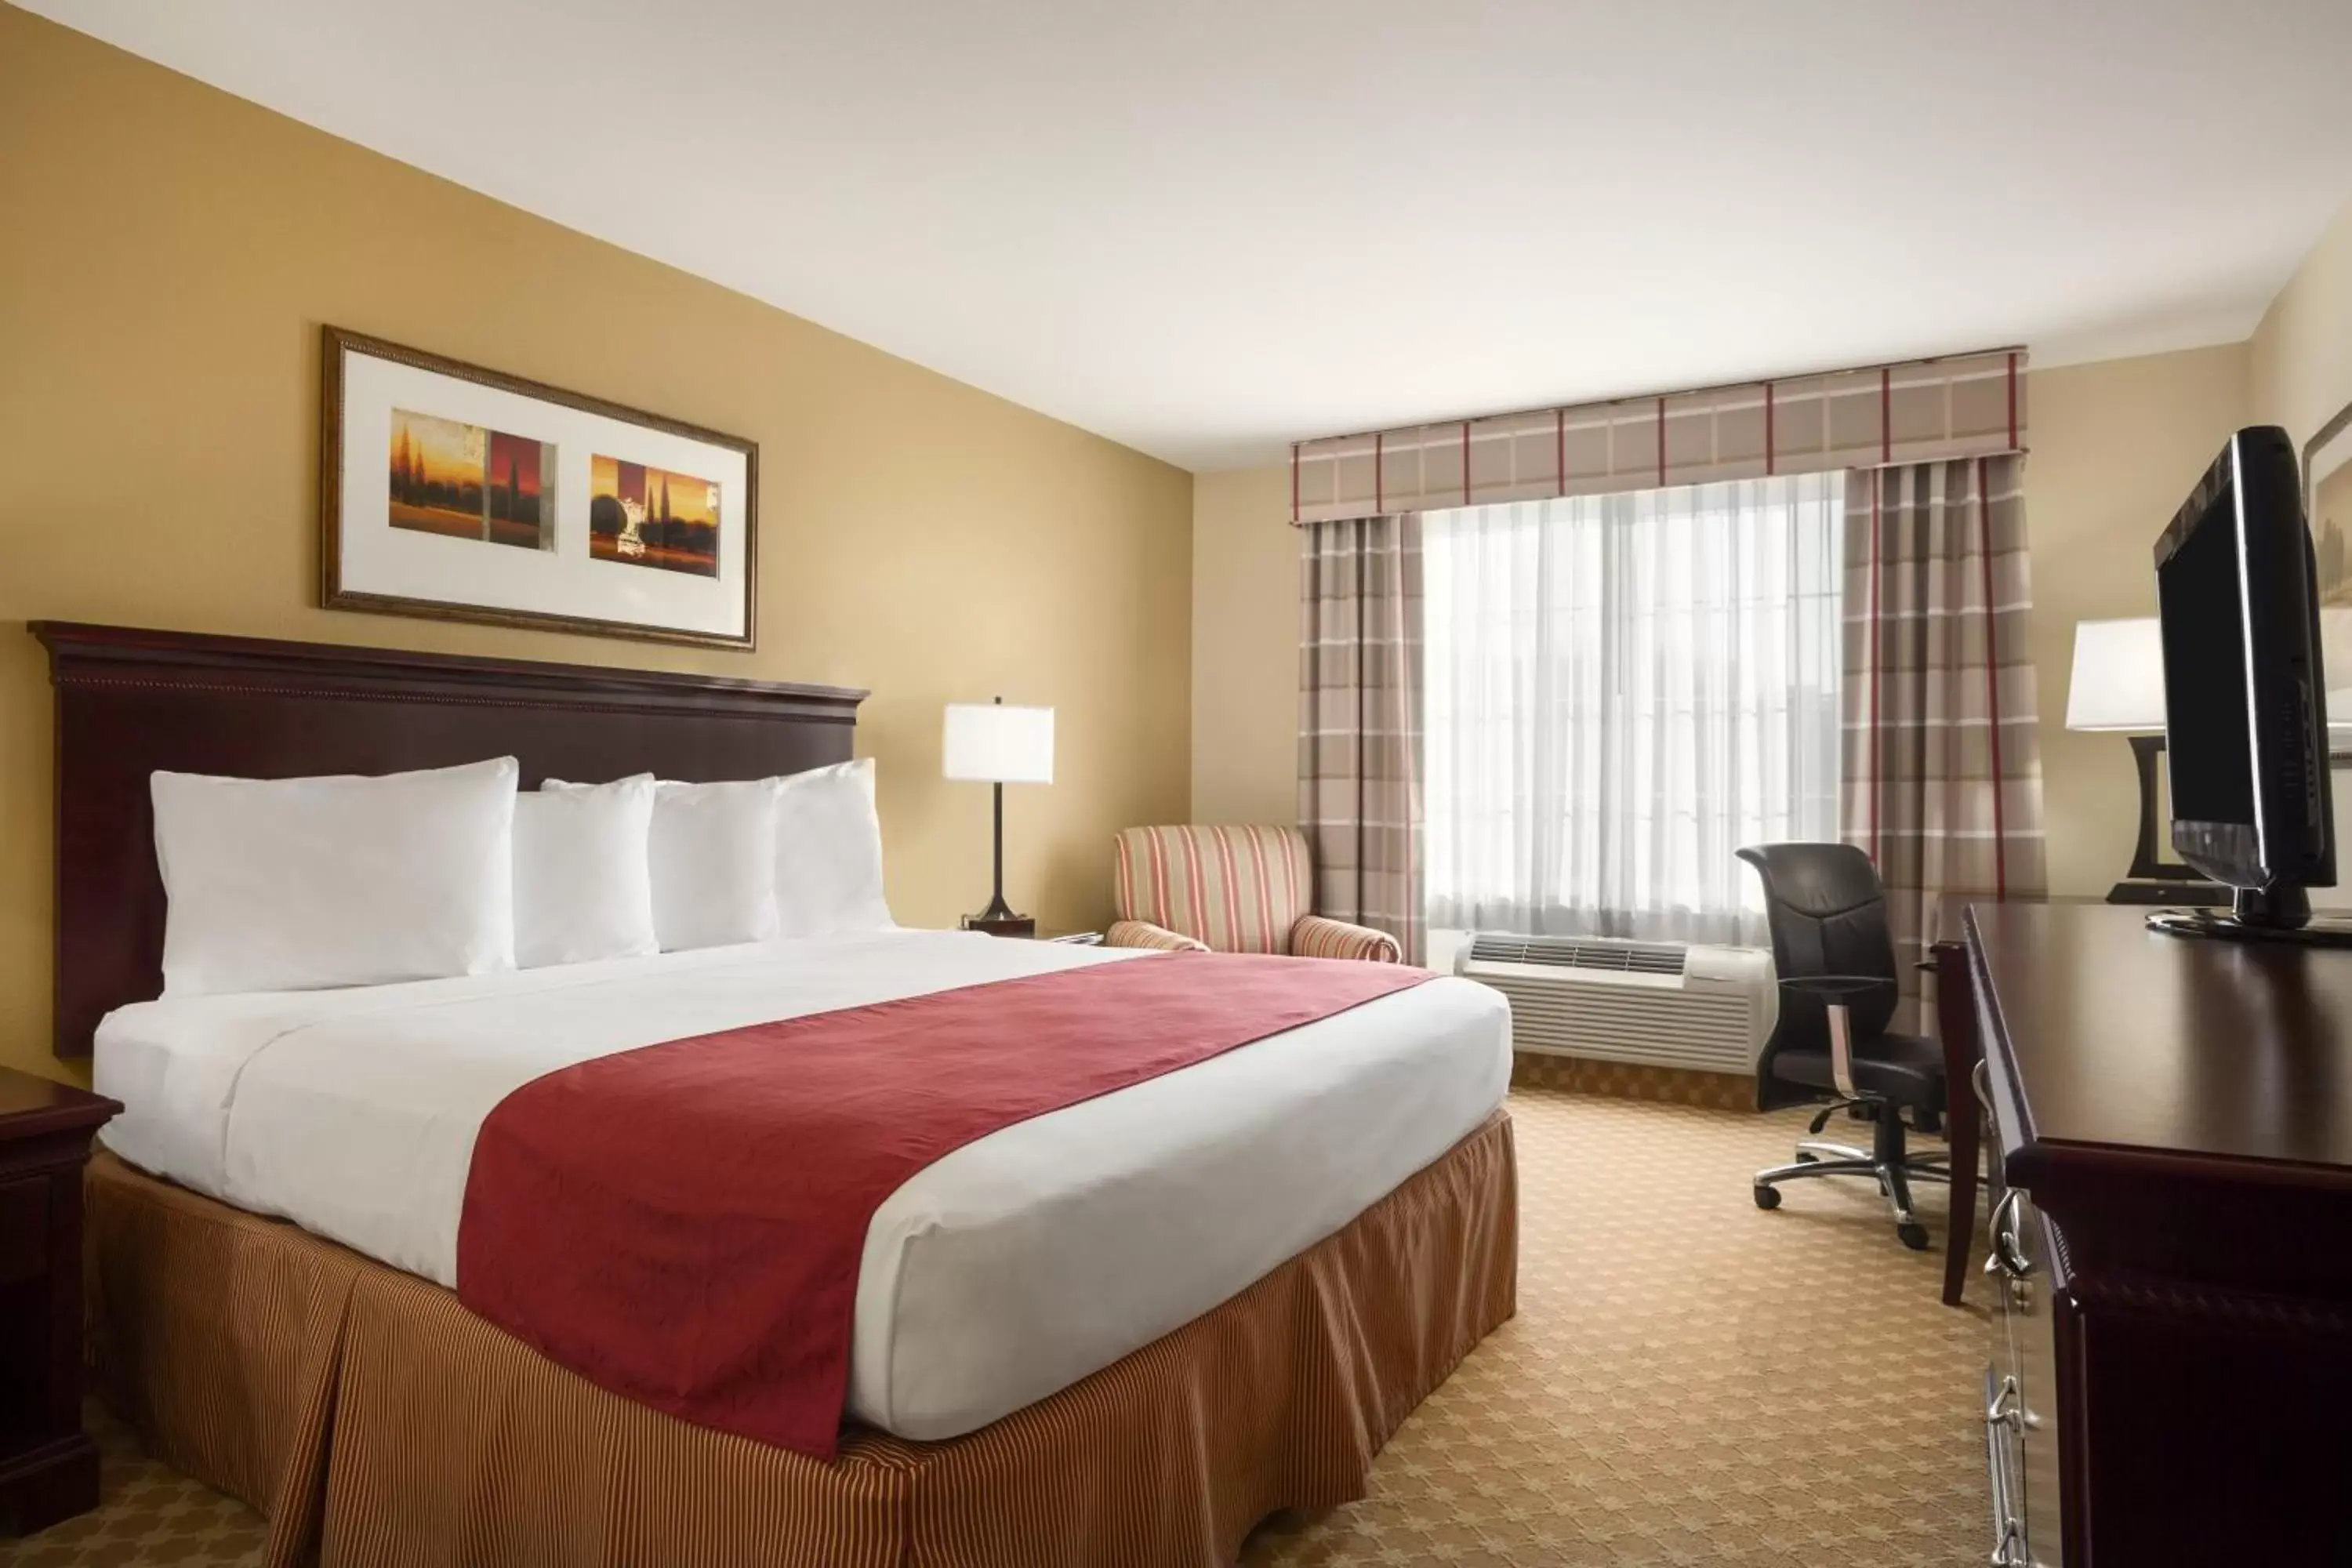 Bed, Room Photo in Country Inn & Suites by Radisson, Washington at Meadowlands, PA